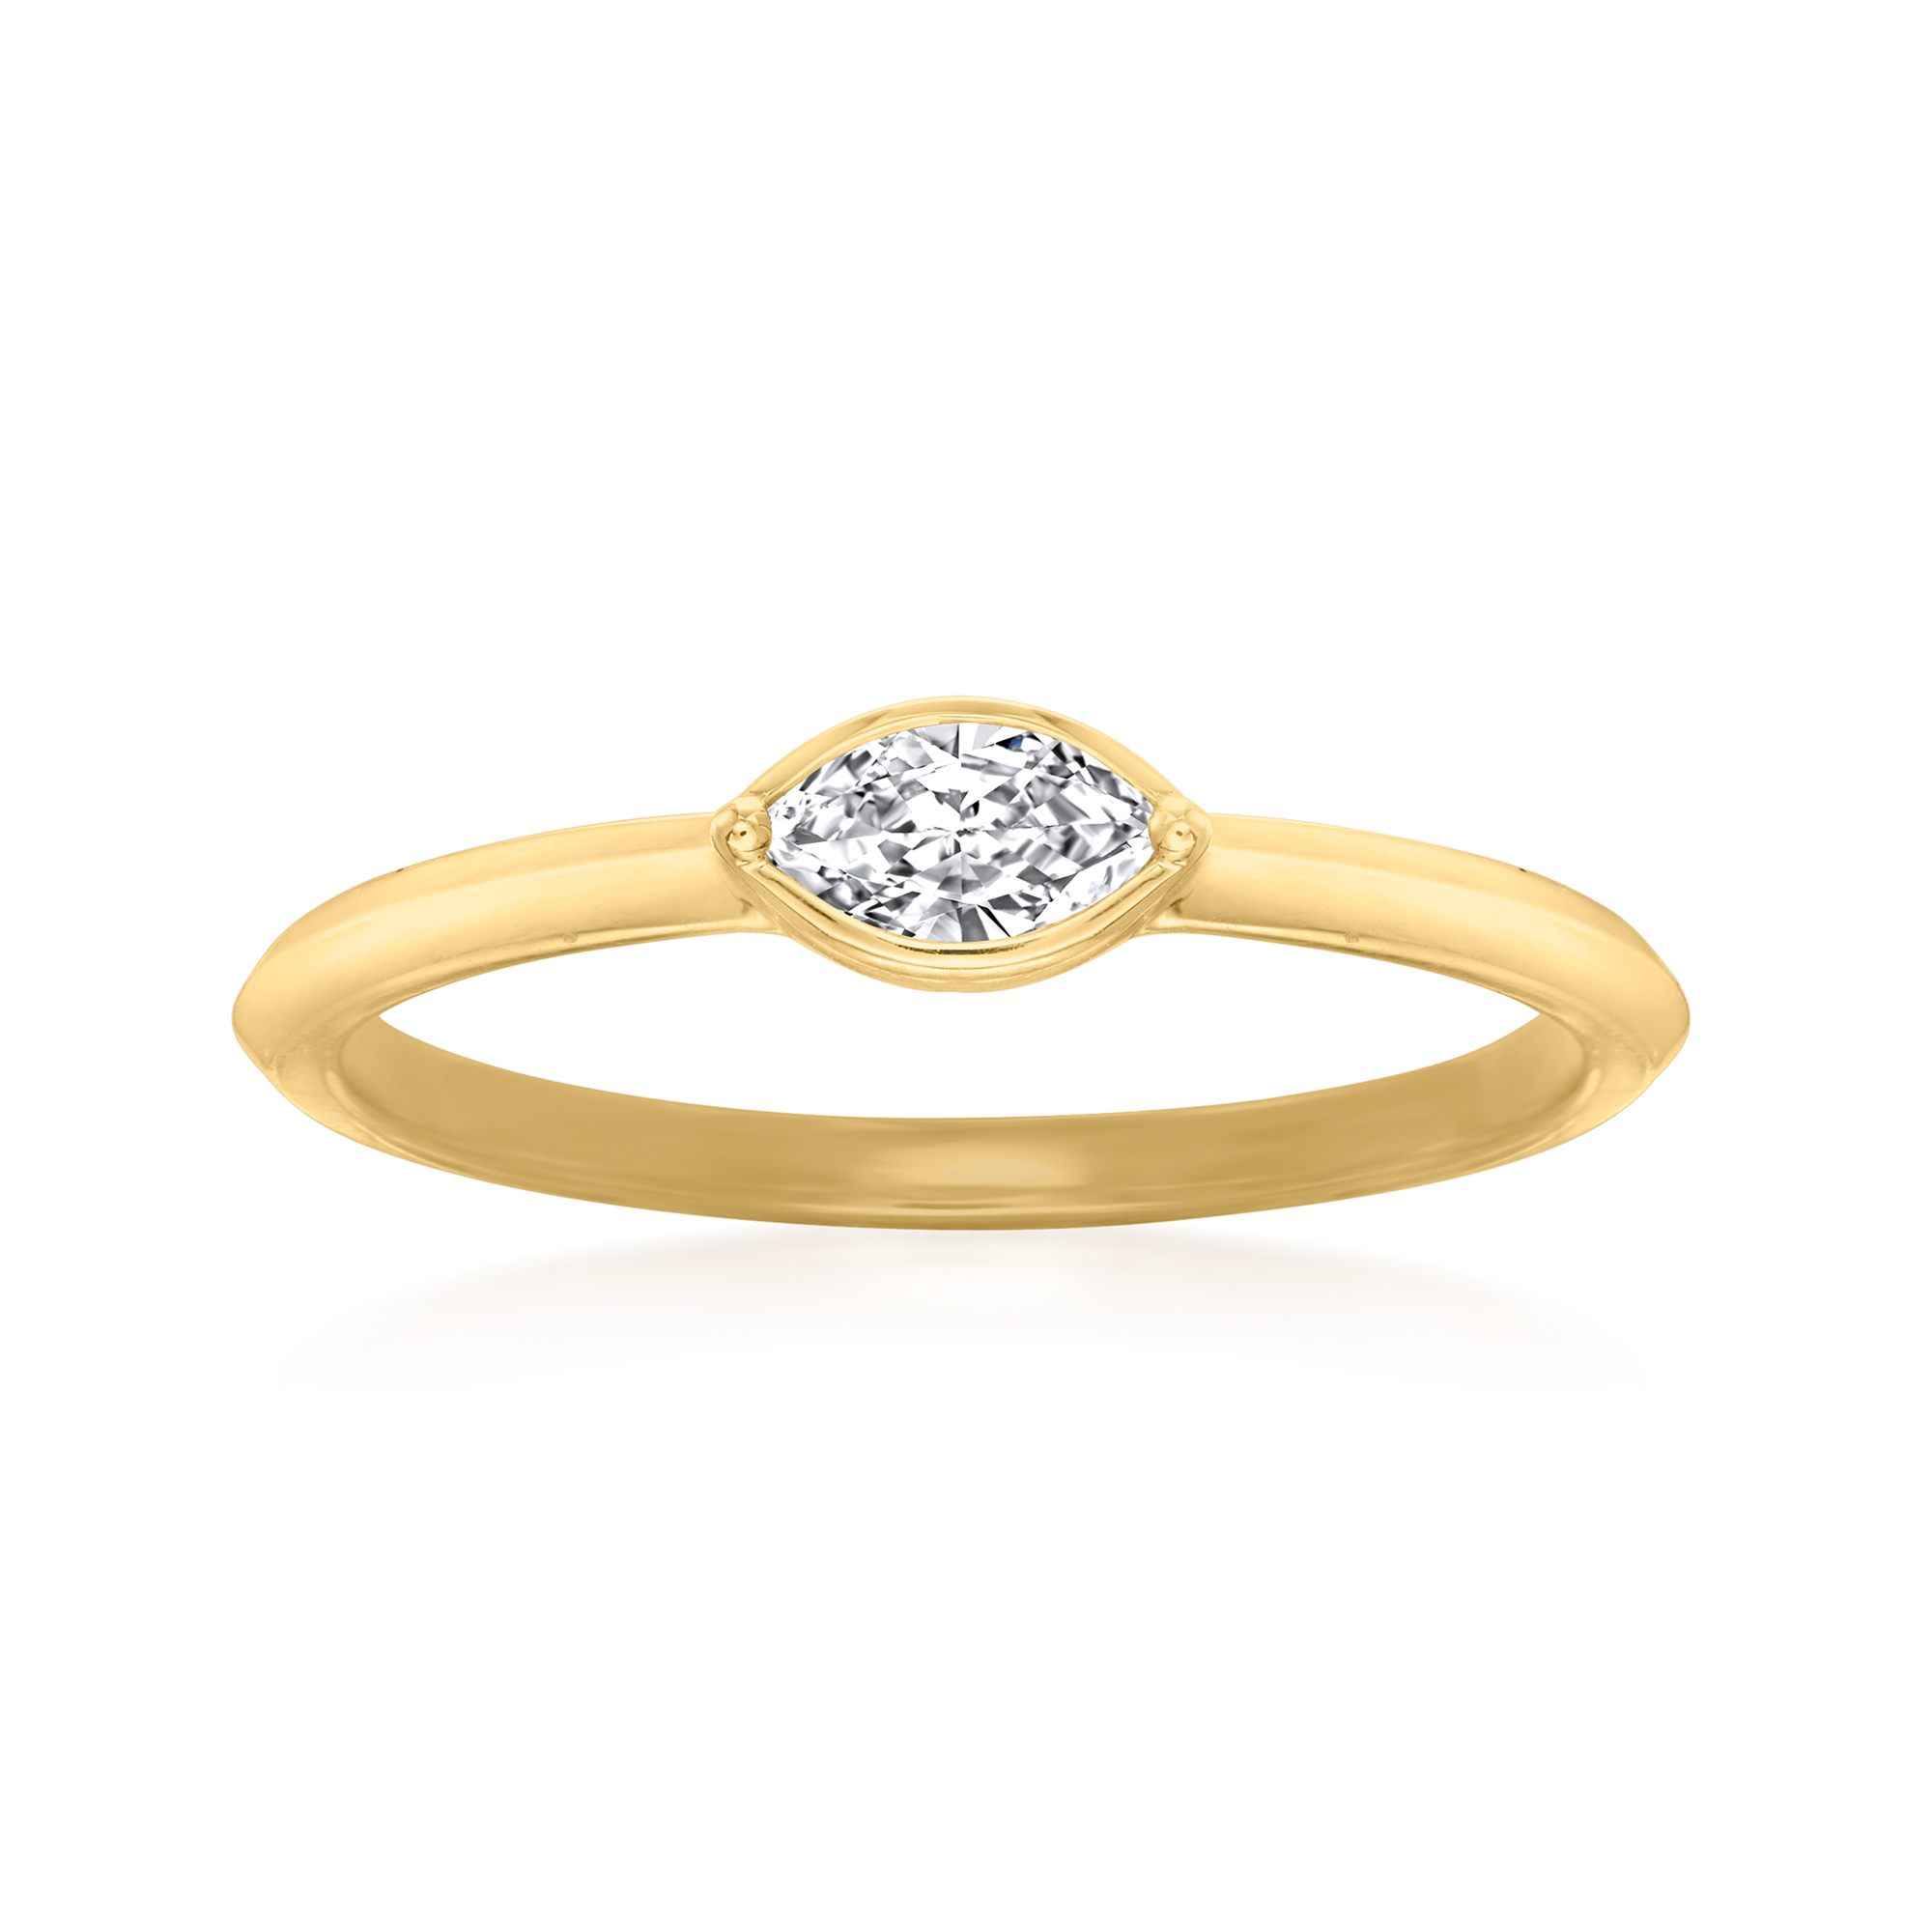 20 Carat Marquise Diamond Solitaire Ring in 14kt Yellow Gold | Ross-Simons